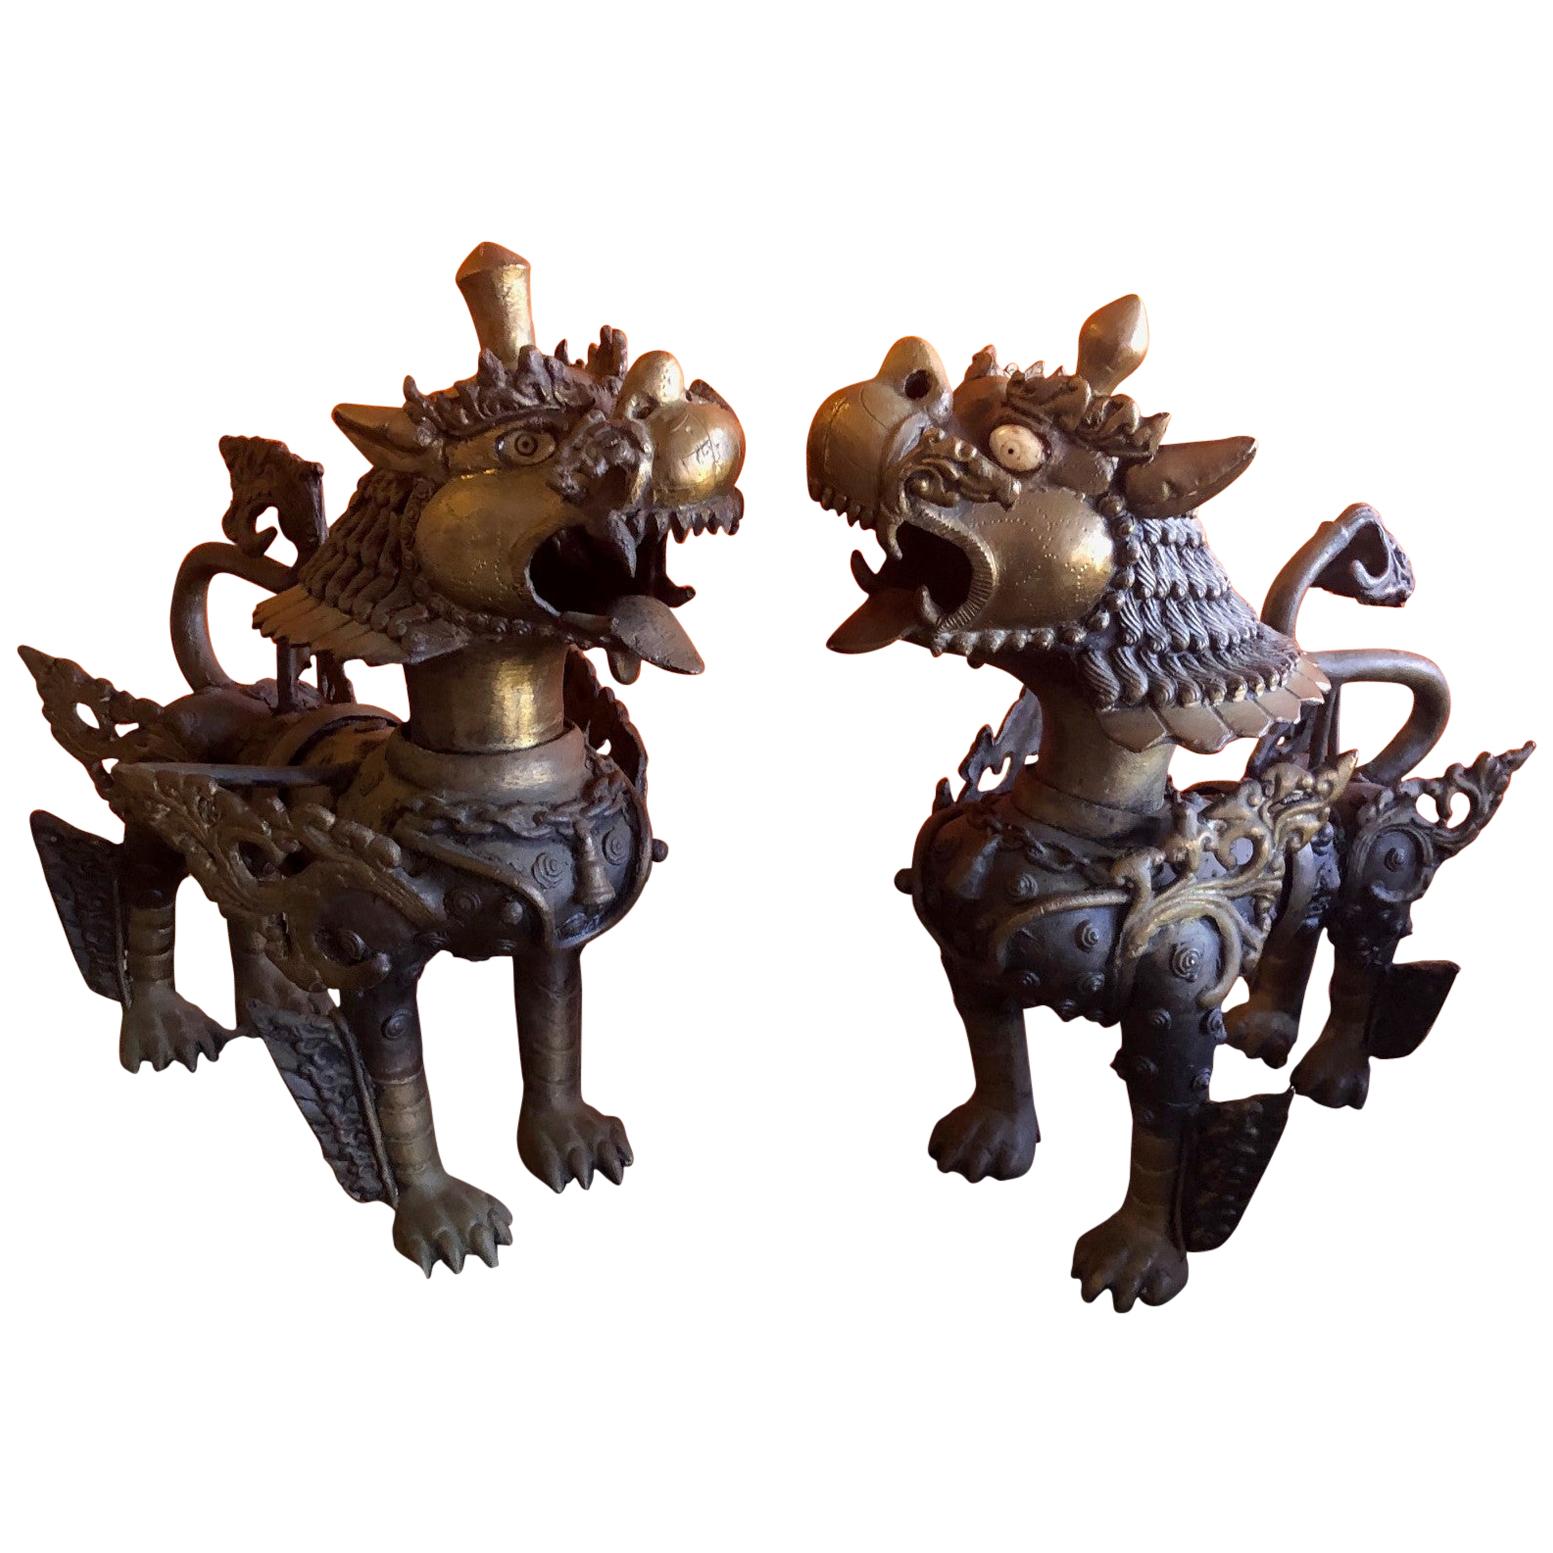 Impressive Pair of Patinated Bronze Chinese Foo Dogs or Tibetan Snow Lions